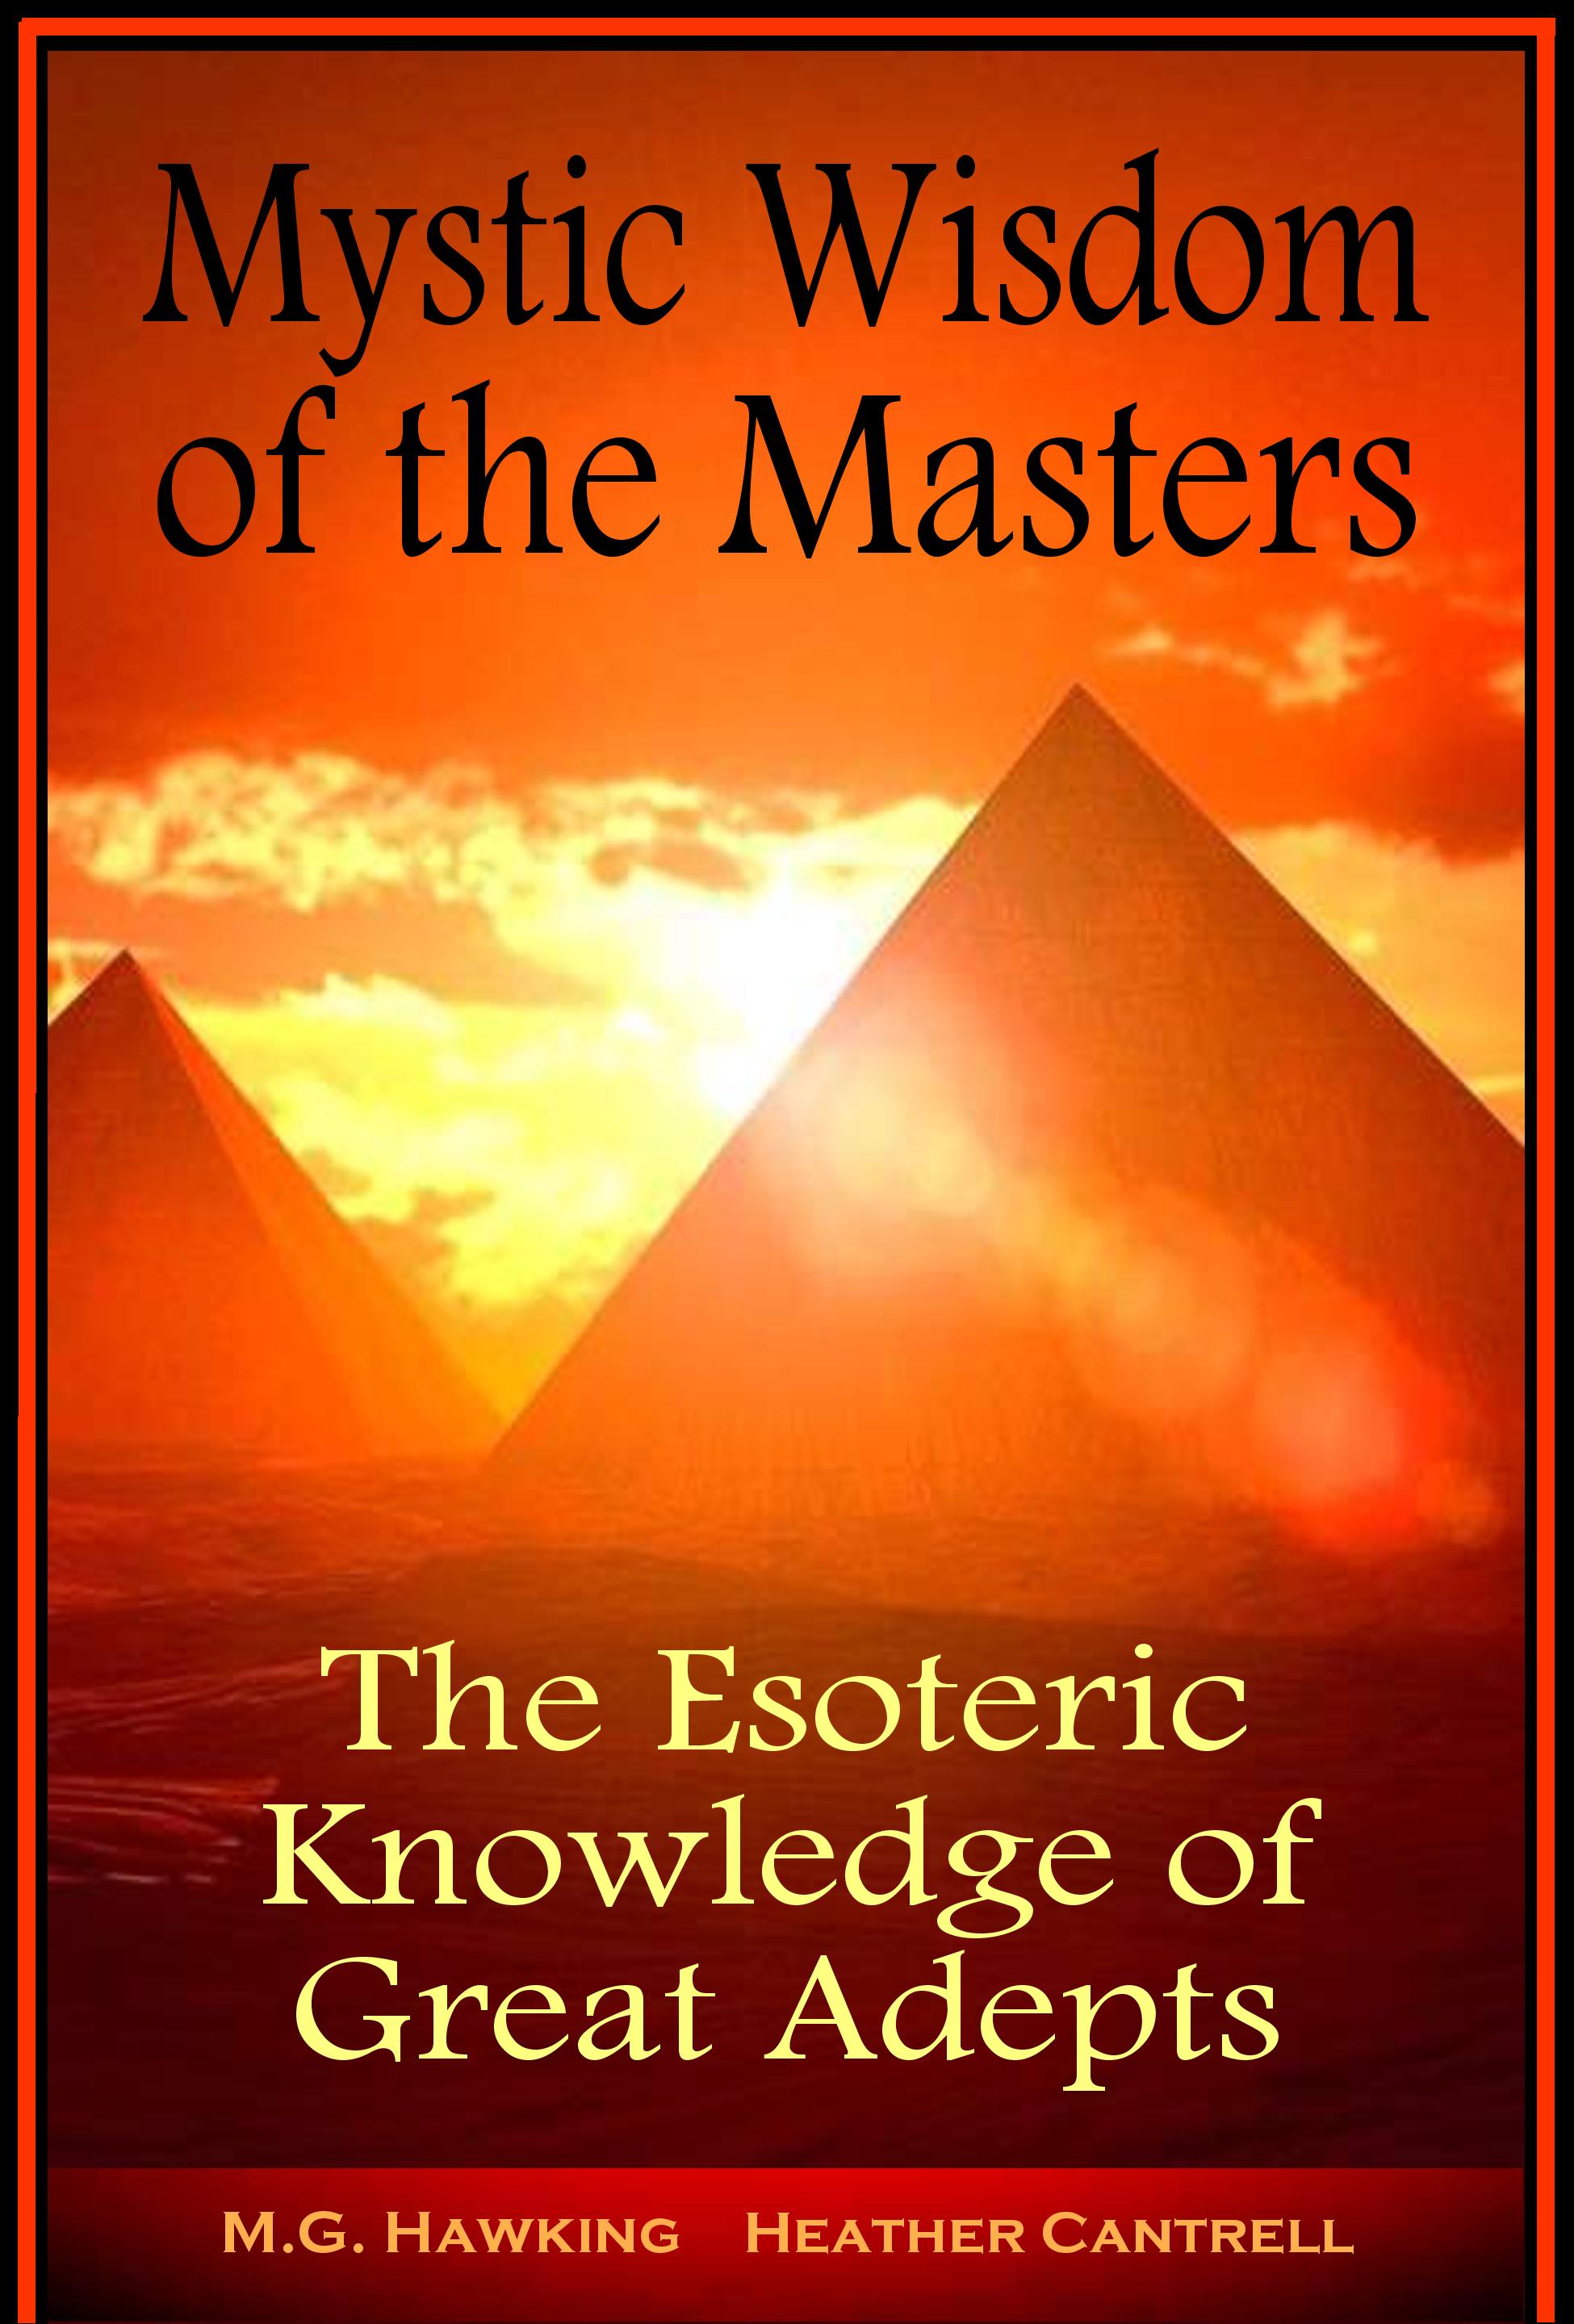 FREE: Mystic Wisdom of the Masters, The Esoteric Knowledge of Great Adepts by M.G. Hawking, Heather Cantrell, Jenna Wolfe Ph.D.